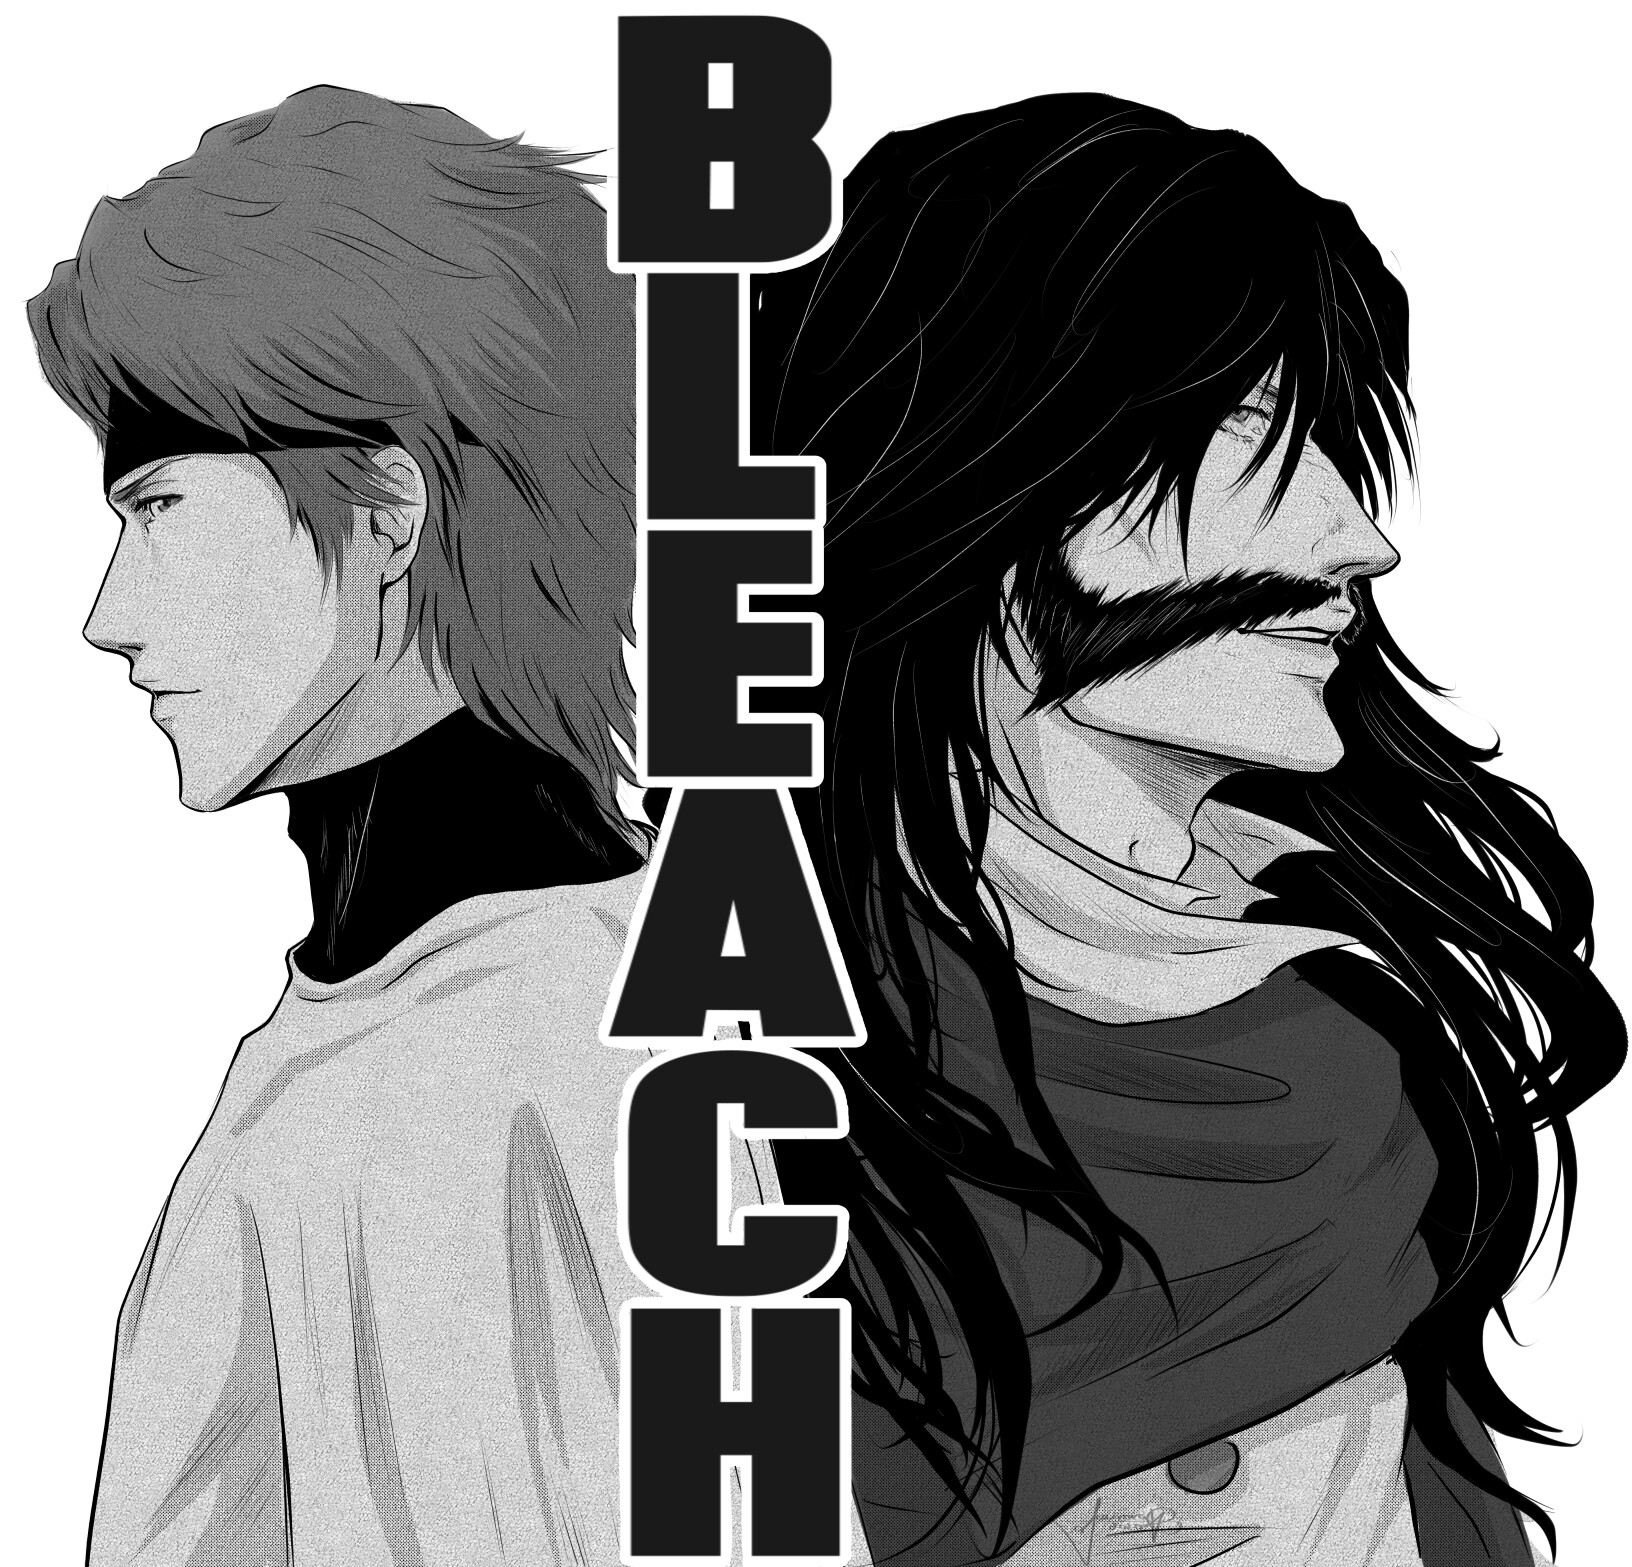 Aizen and Yhwach.